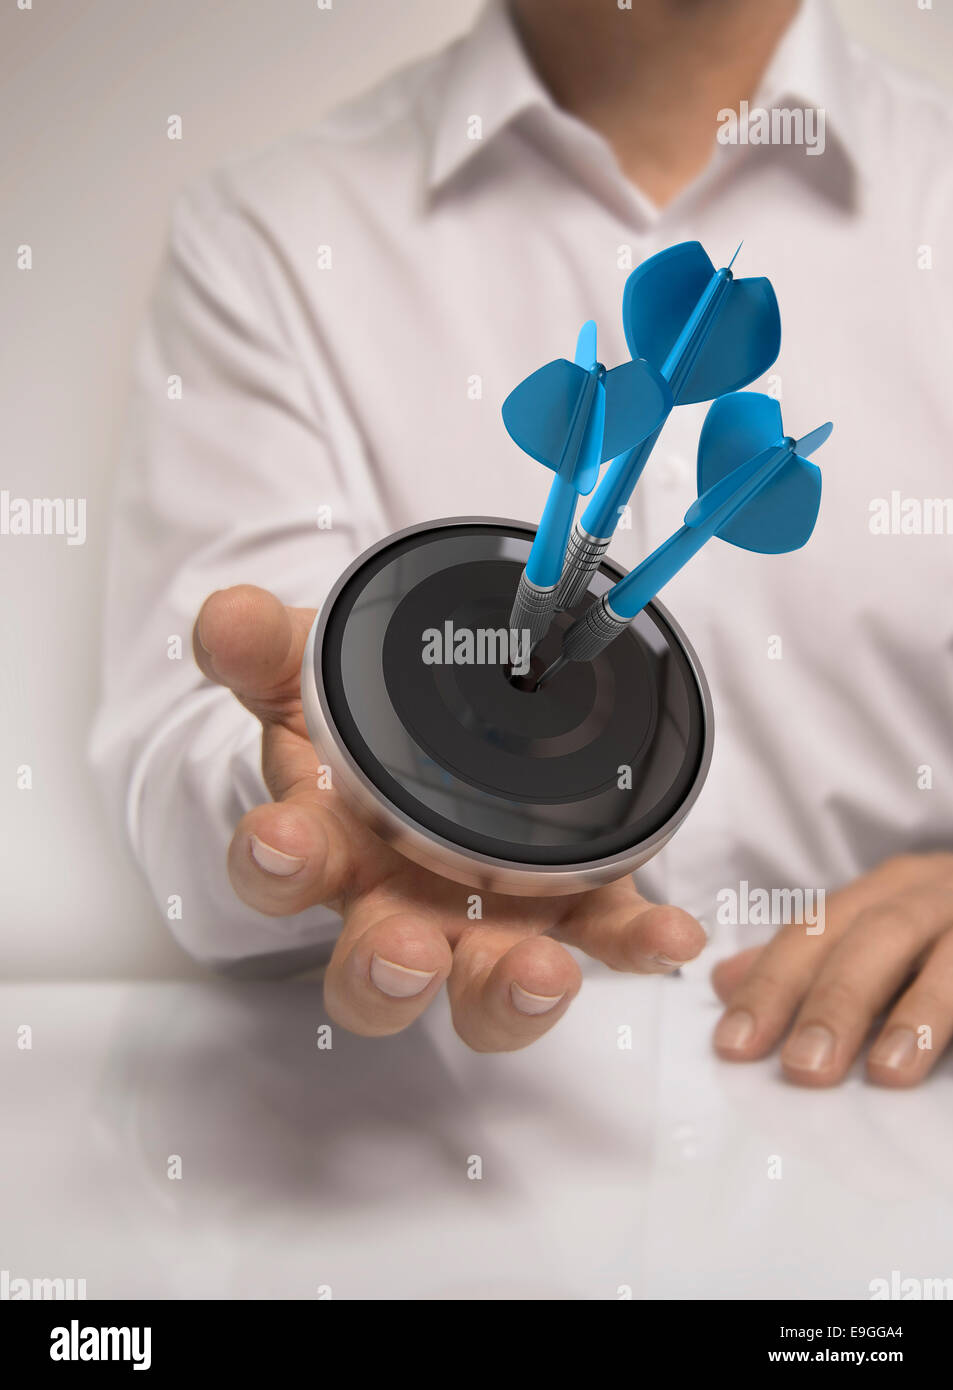 Man hand holding a target with three darts hitting the center, blue and beige tones, concept image for illustration of marketing Stock Photo